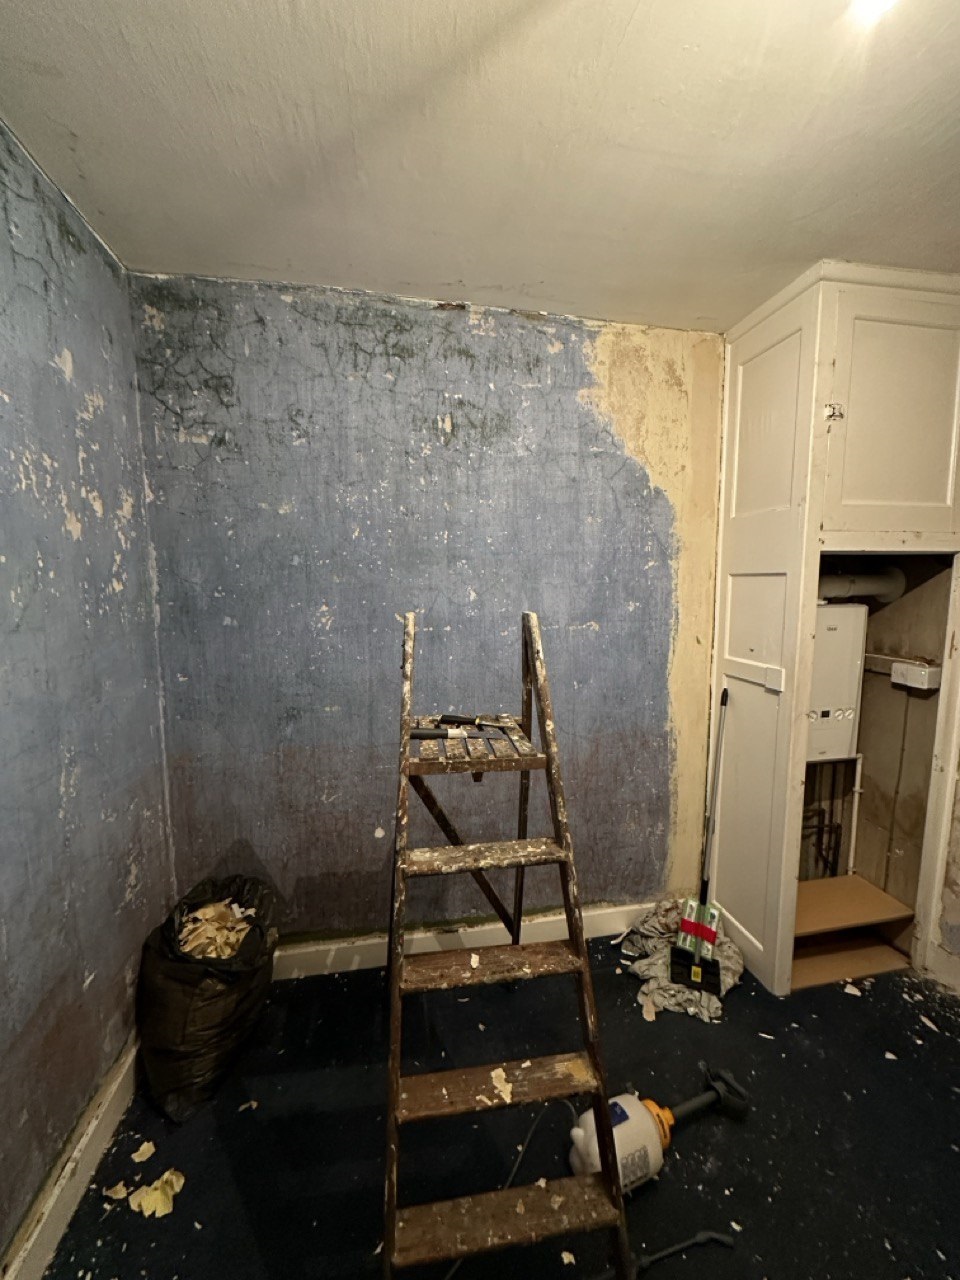 Peeled off 5 layers of wallpaper to weirdo blue walls and a wall of plywood?